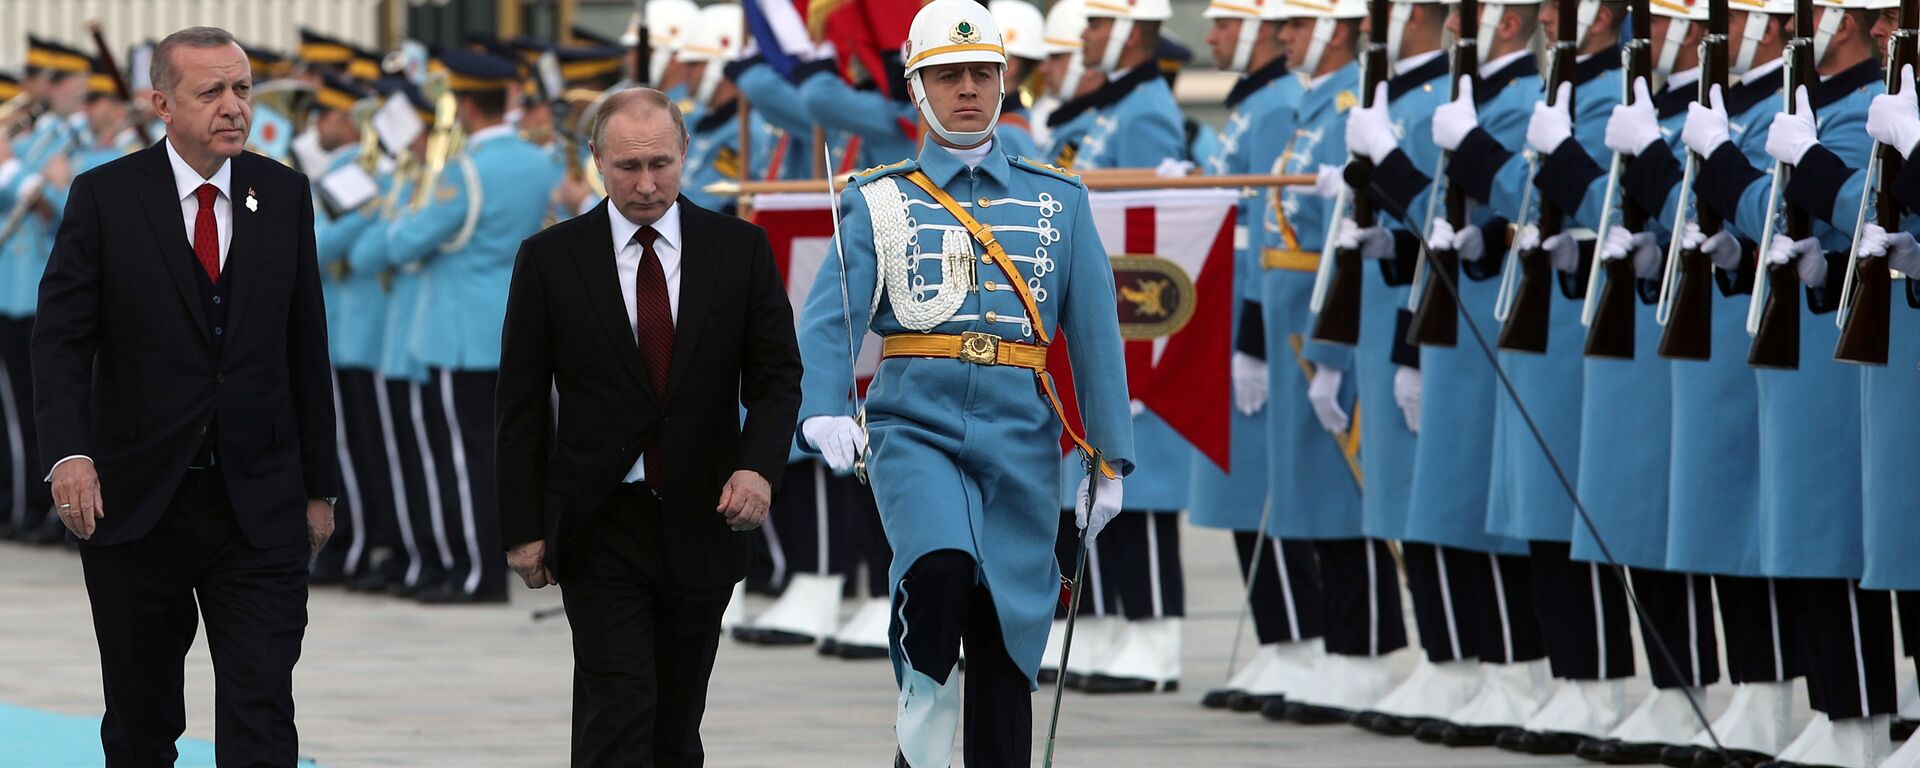 Turkish President Tayyip Erdogan and his Russian counterpart Vladimir Putin review a guard of honour during a welcoming ceremony at the Presidential Palace in Ankara, Turkey April 3, 2018 - Sputnik International, 1920, 03.04.2018